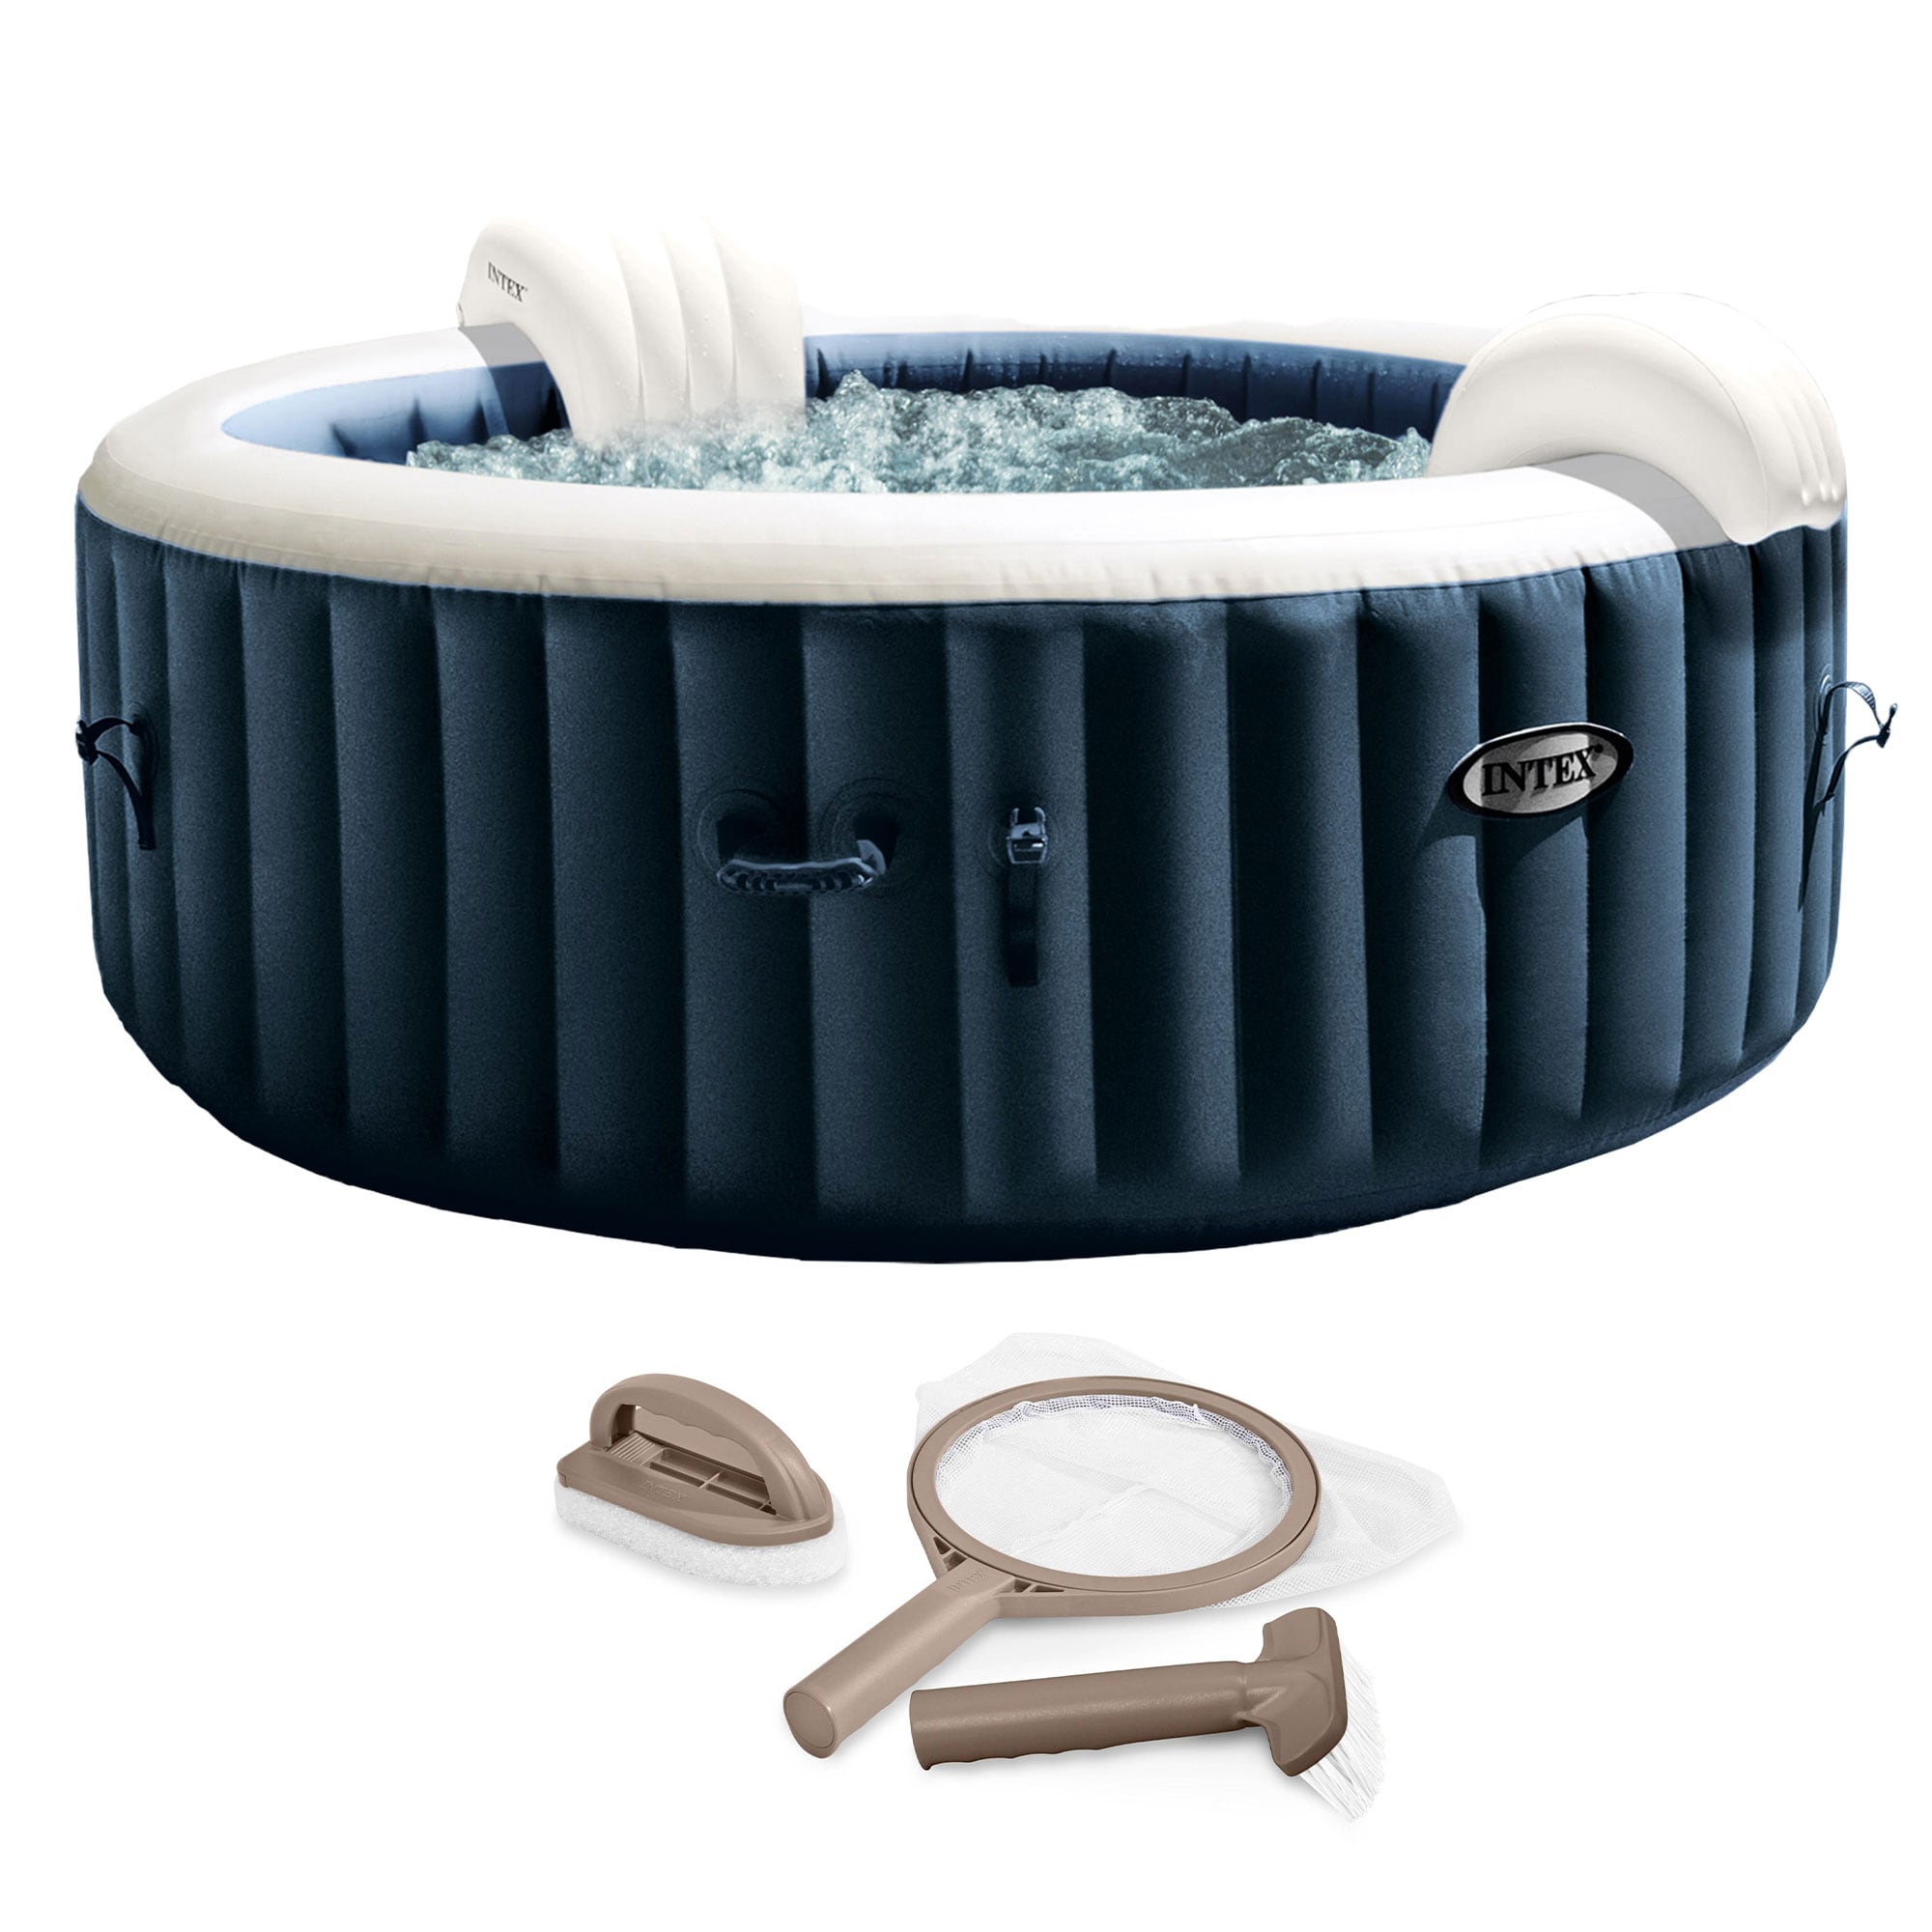 Appui-tête Deluxe spa gonflable INTEX